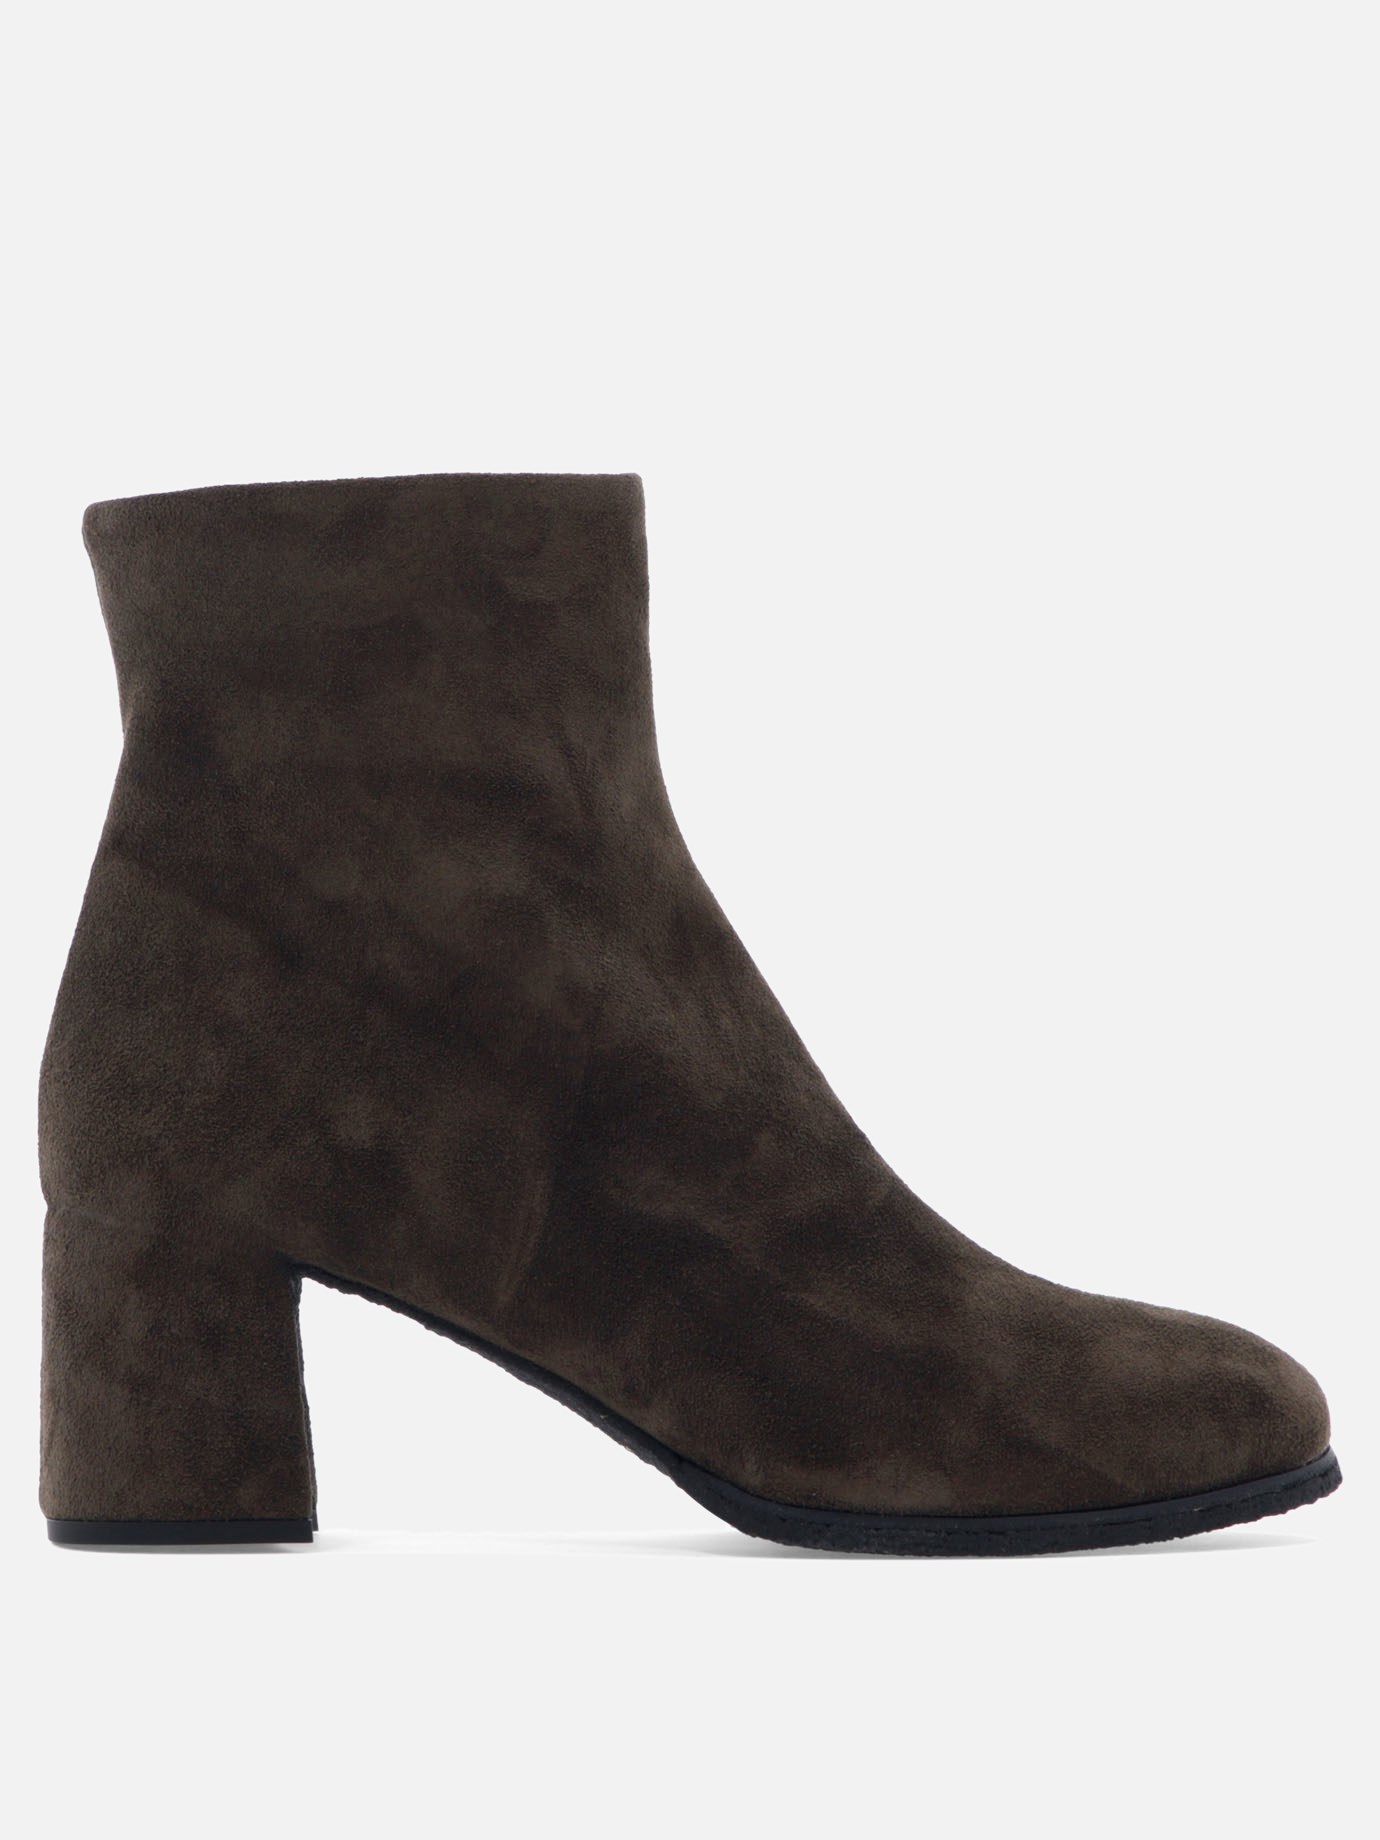  Holly  ankle bootsby Del Carlo - 2